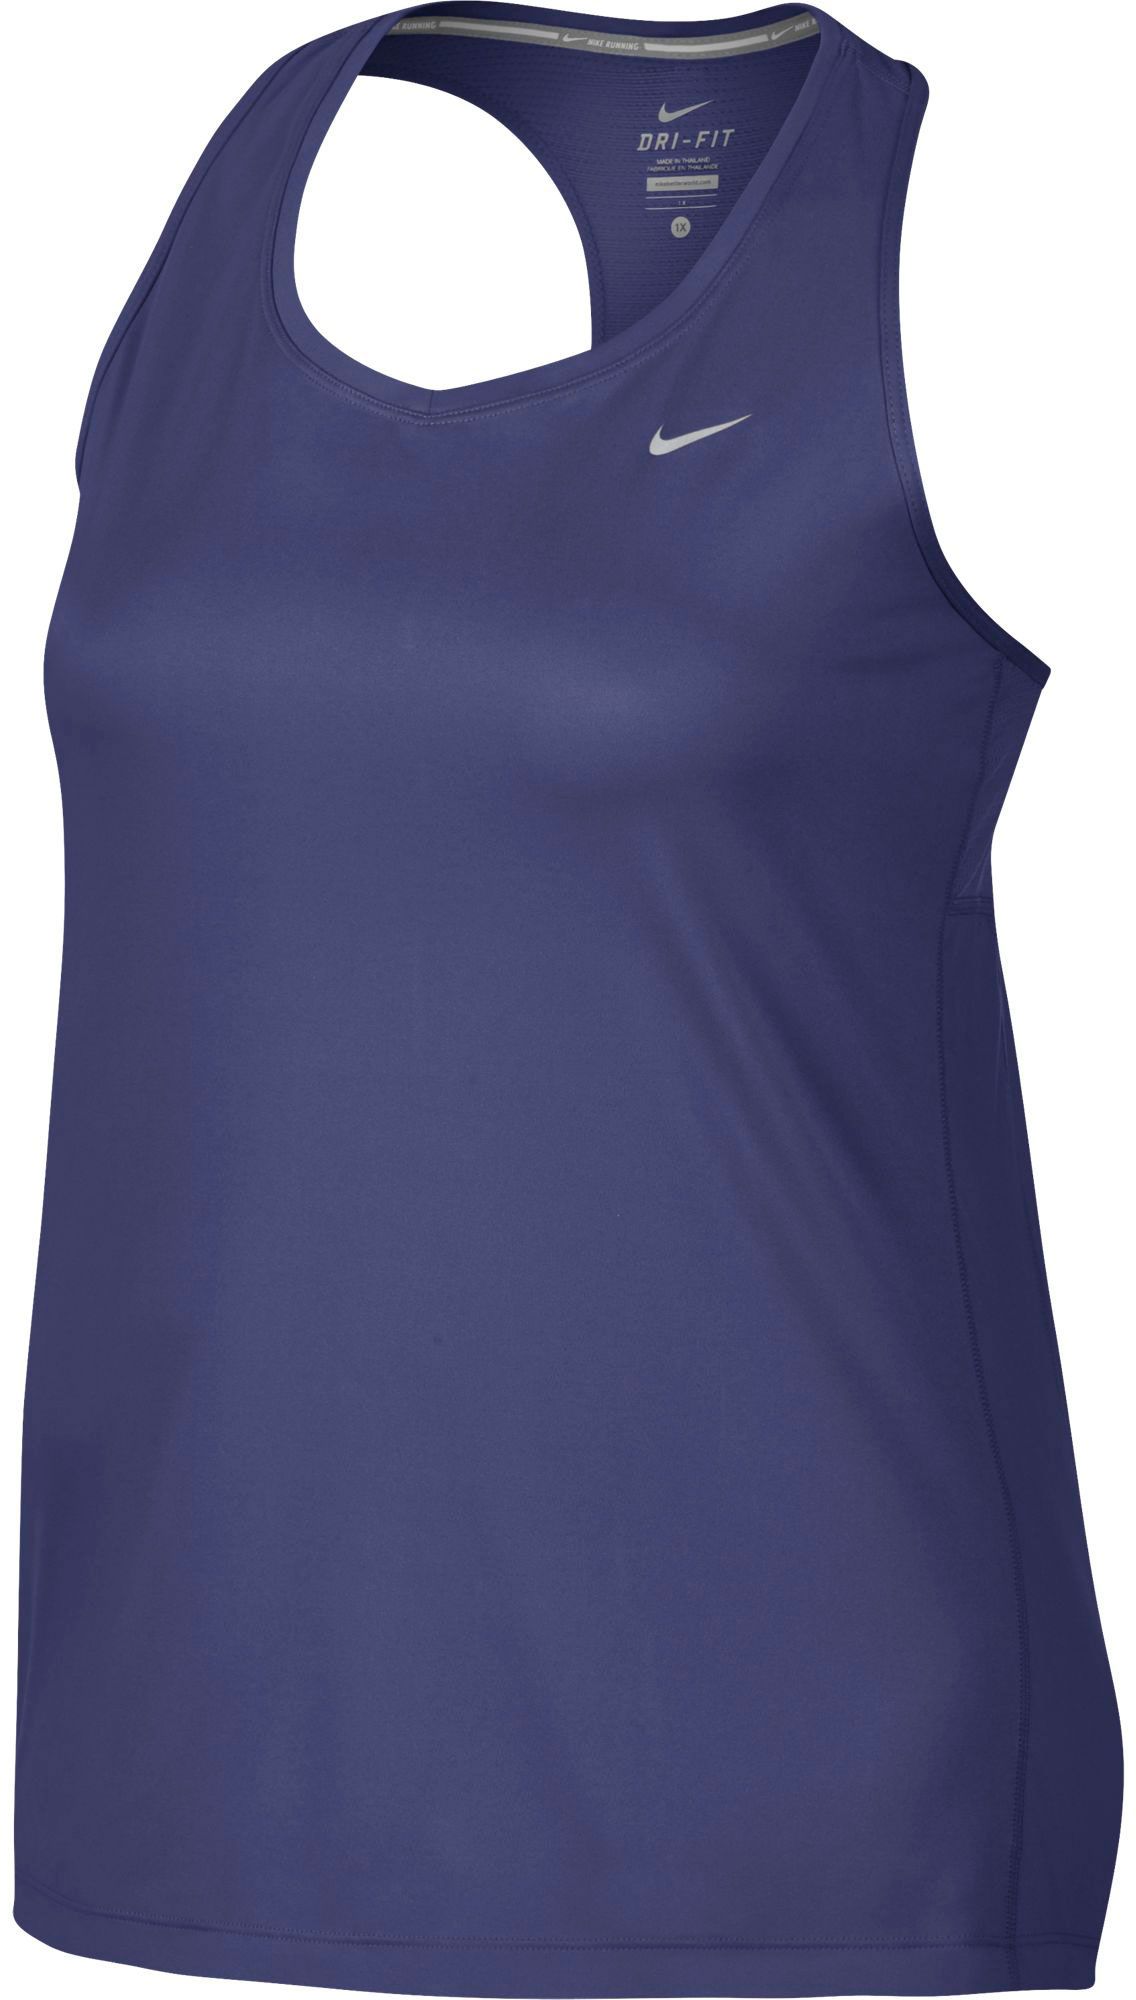 Workout Clothes & Gear for Women | DICK'S Sporting Goods